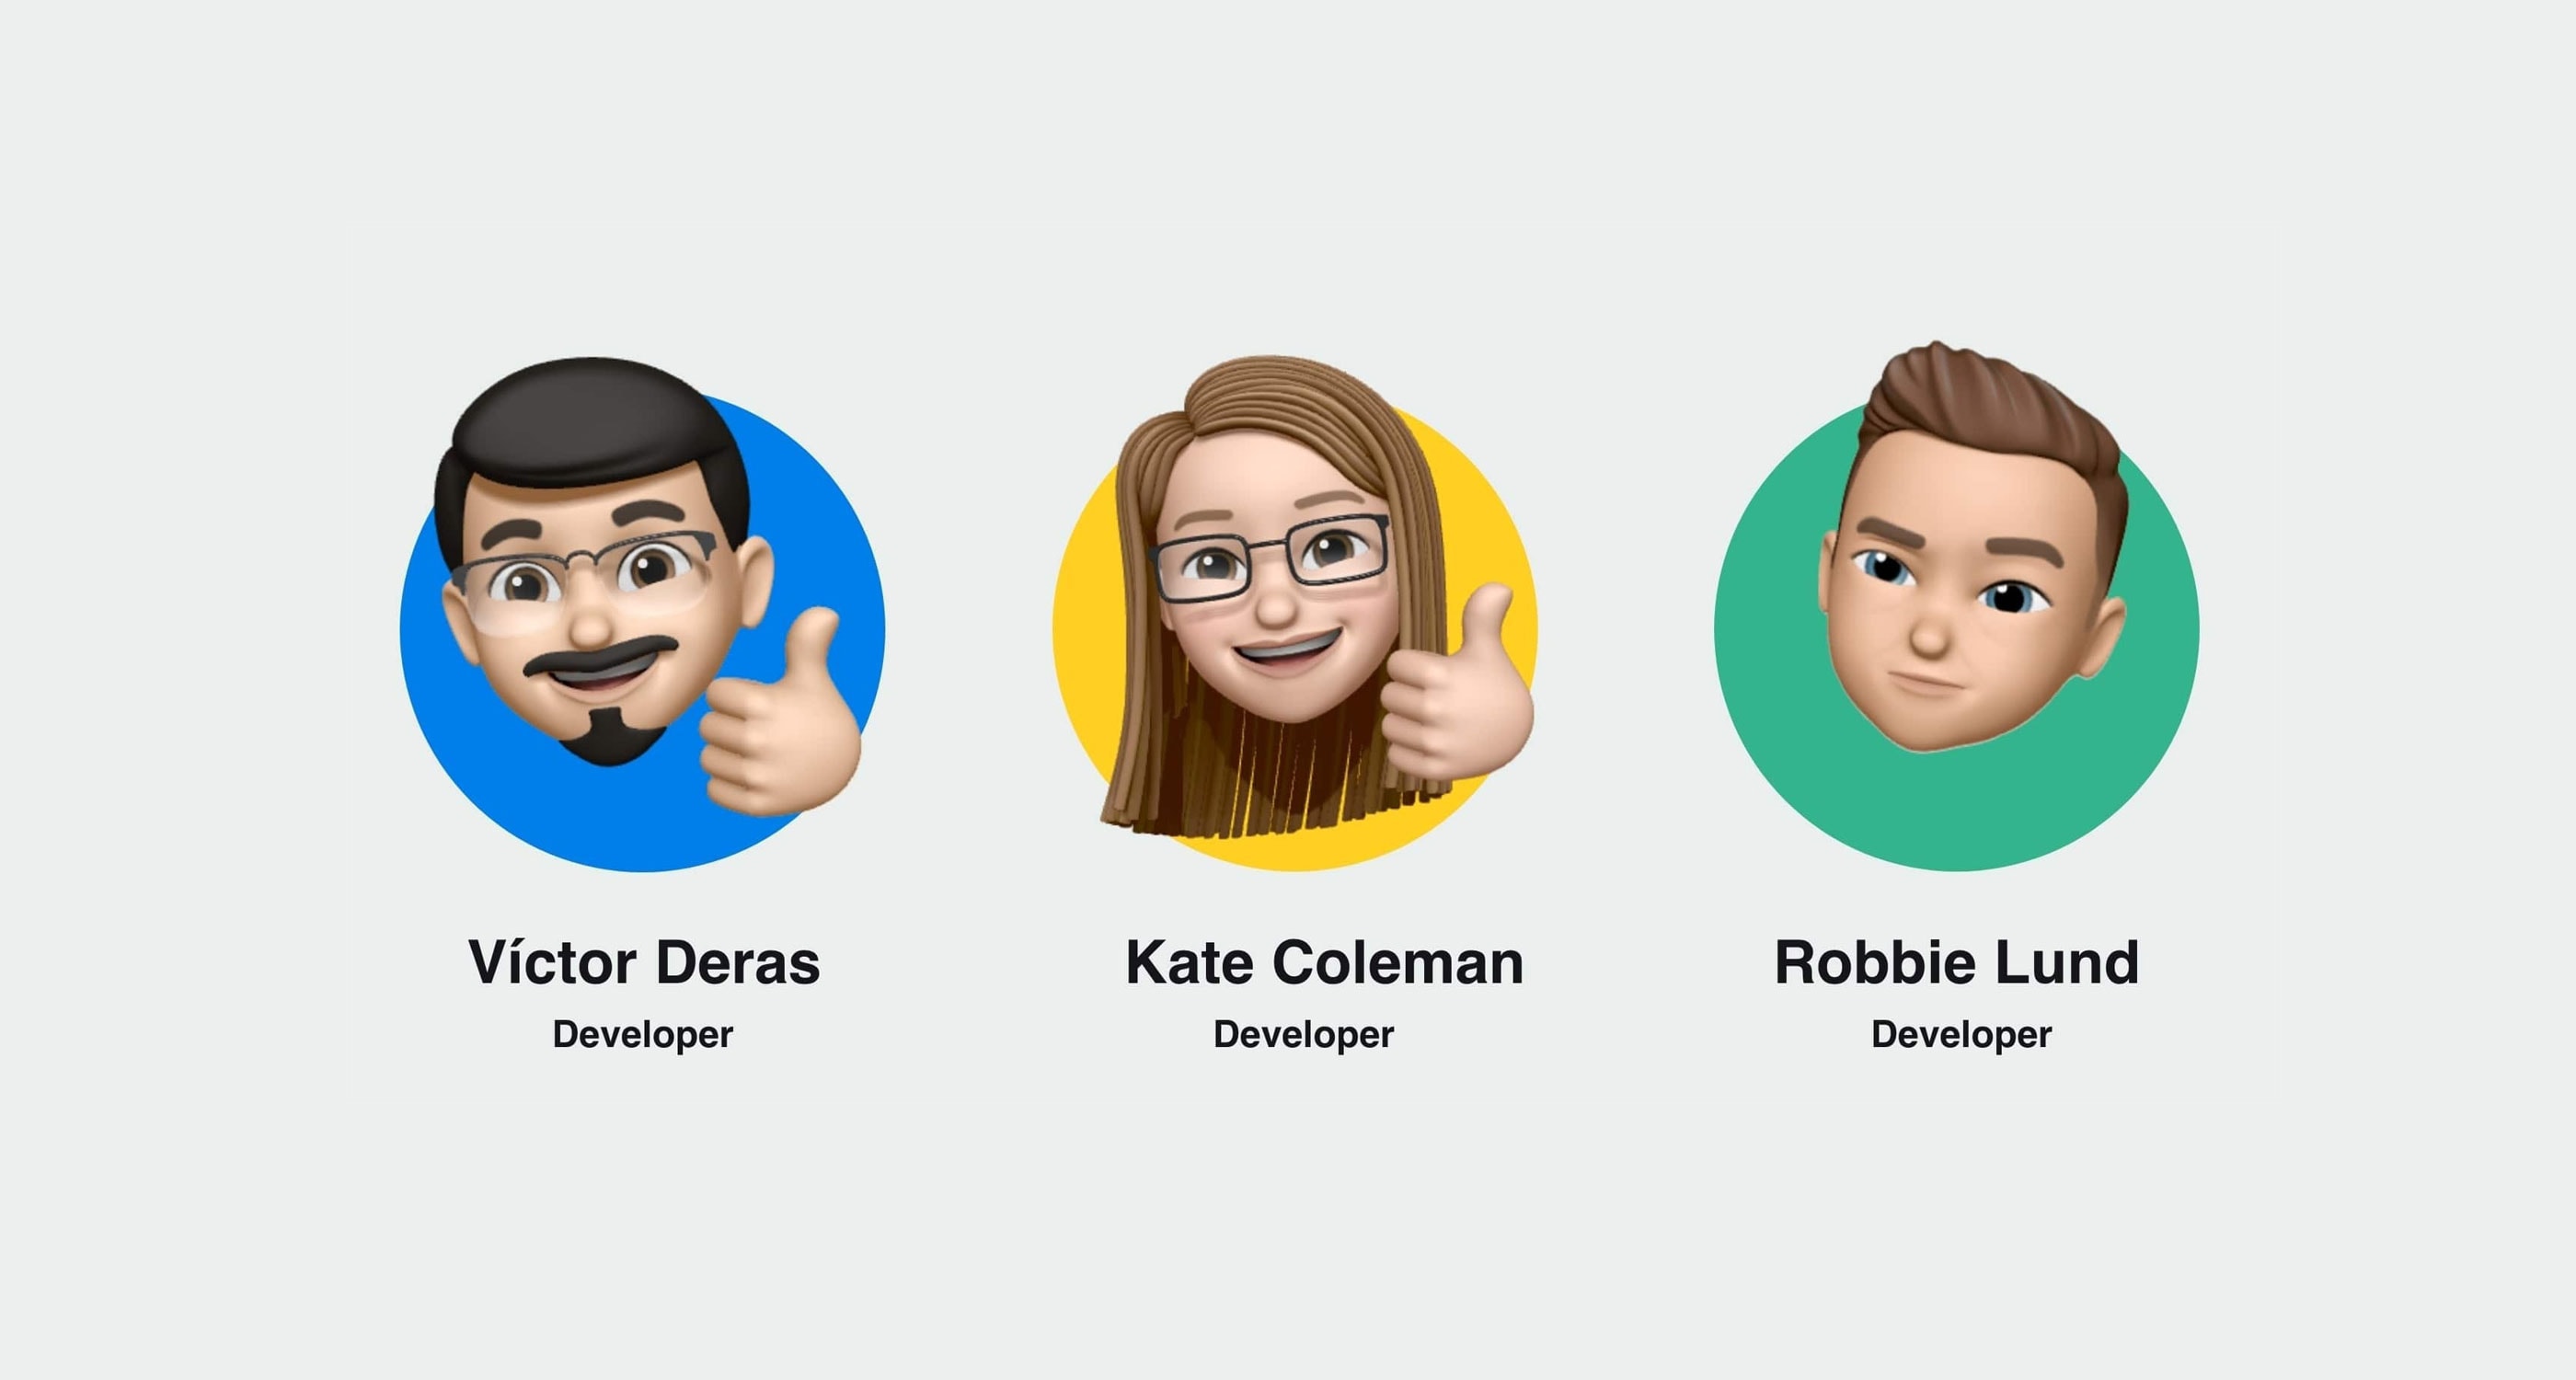 Three emojis that are styled to look like three of our developers sit in a line. Each is backed by a bright color, and has the Makers name and job title underneath. Left to right: Victor Deras, Developer, Kate Coleman, Developer, Robbie Lund, Developer.